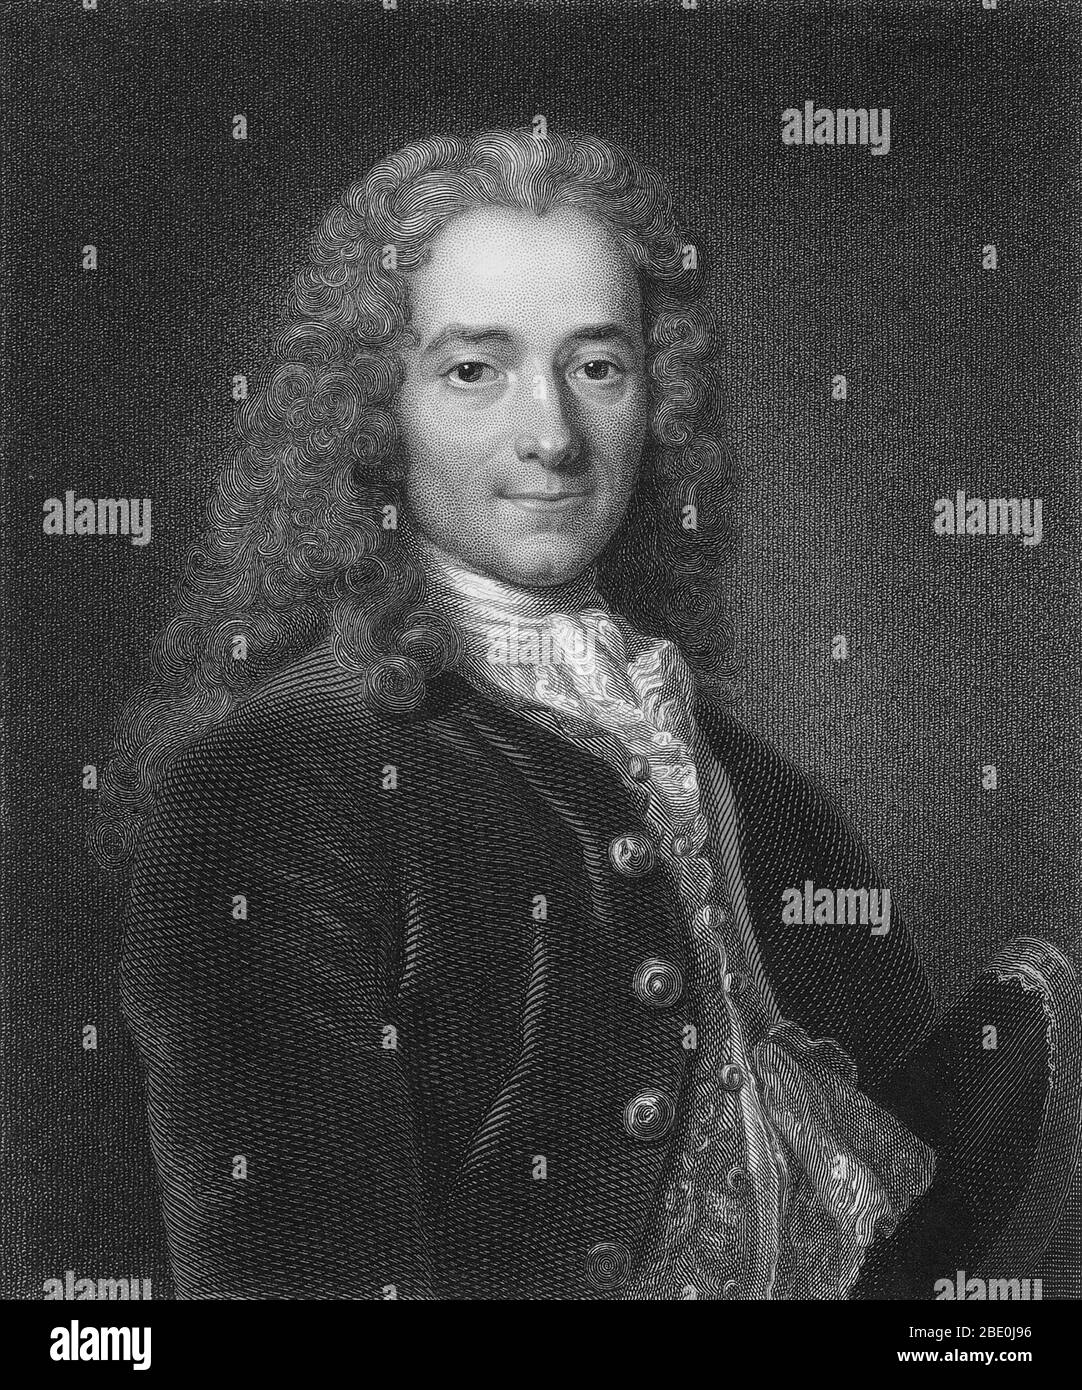 Francois-Marie Arouet (November 21, 1694 - May 30, 1778), known by his nom de plume Voltaire, was a French Enlightenment writer, historian and philosopher famous for his wit, his attacks on the established Catholic Church, and his advocacy of freedom of religion, freedom of expression, and separation of church and state. Voltaire was a versatile writer, producing works in almost every literary form, including plays, poems, novels, essays, and historical and scientific works. He wrote more than 20,000 letters and more than 2,000 books and pamphlets. He was an outspoken advocate, despite the ris Stock Photo